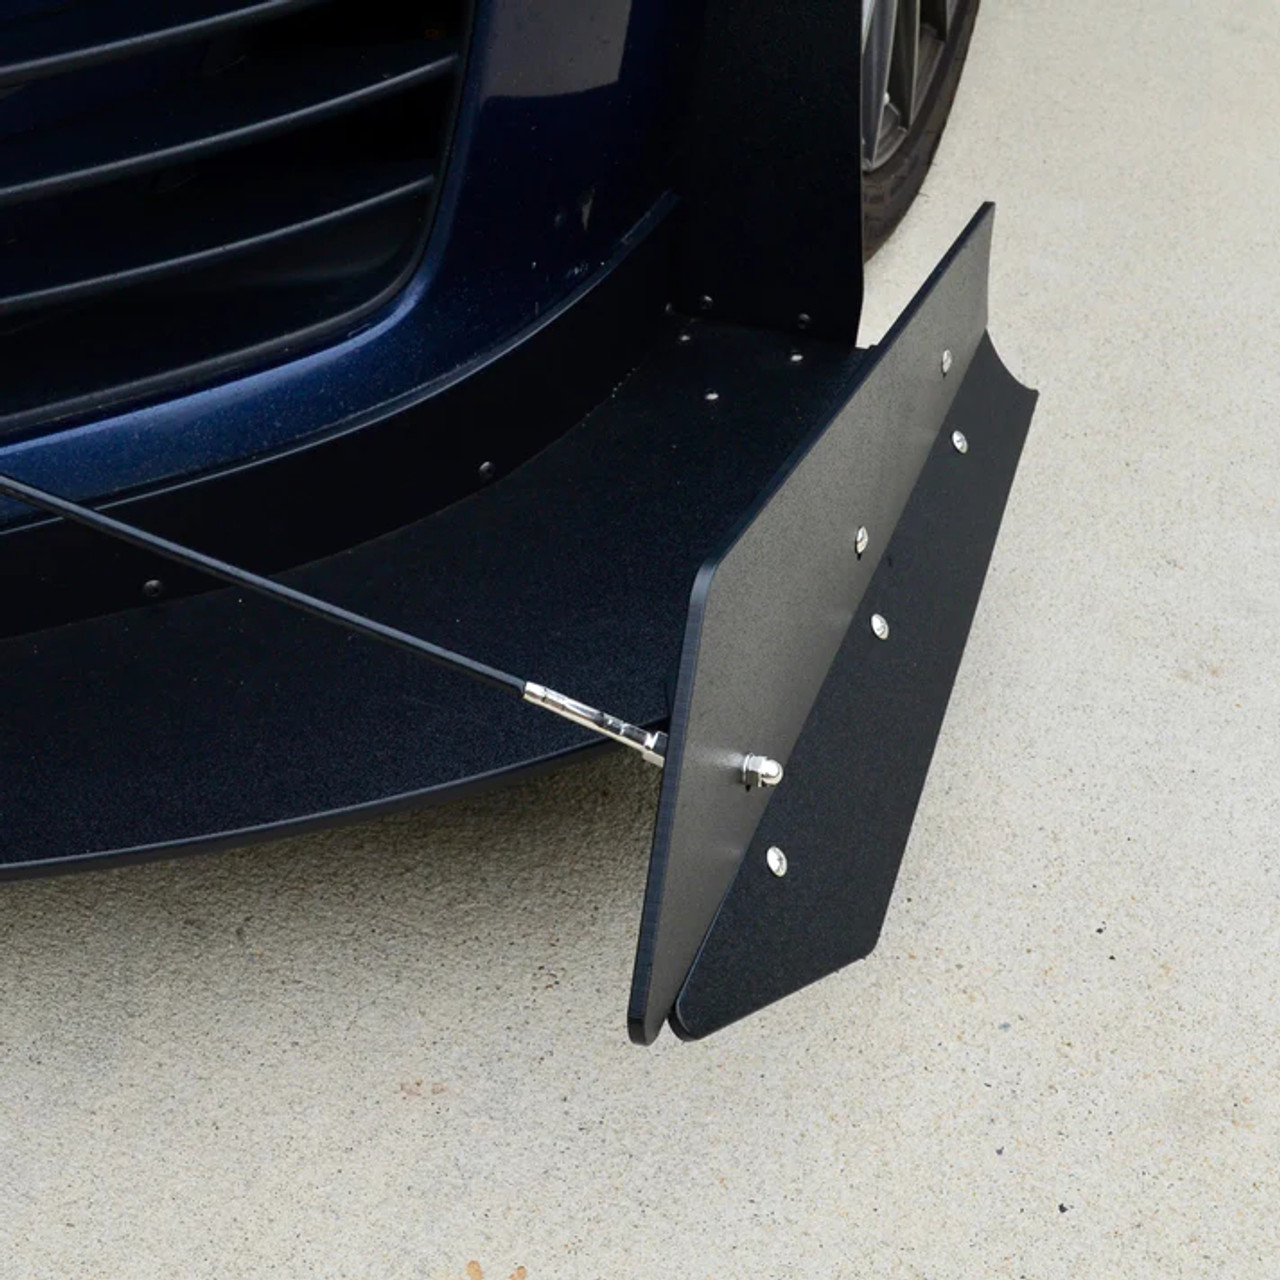 CJM Industries V3 CFD Tested Chassis Mounted Front Splitter for MK7.5 GTI